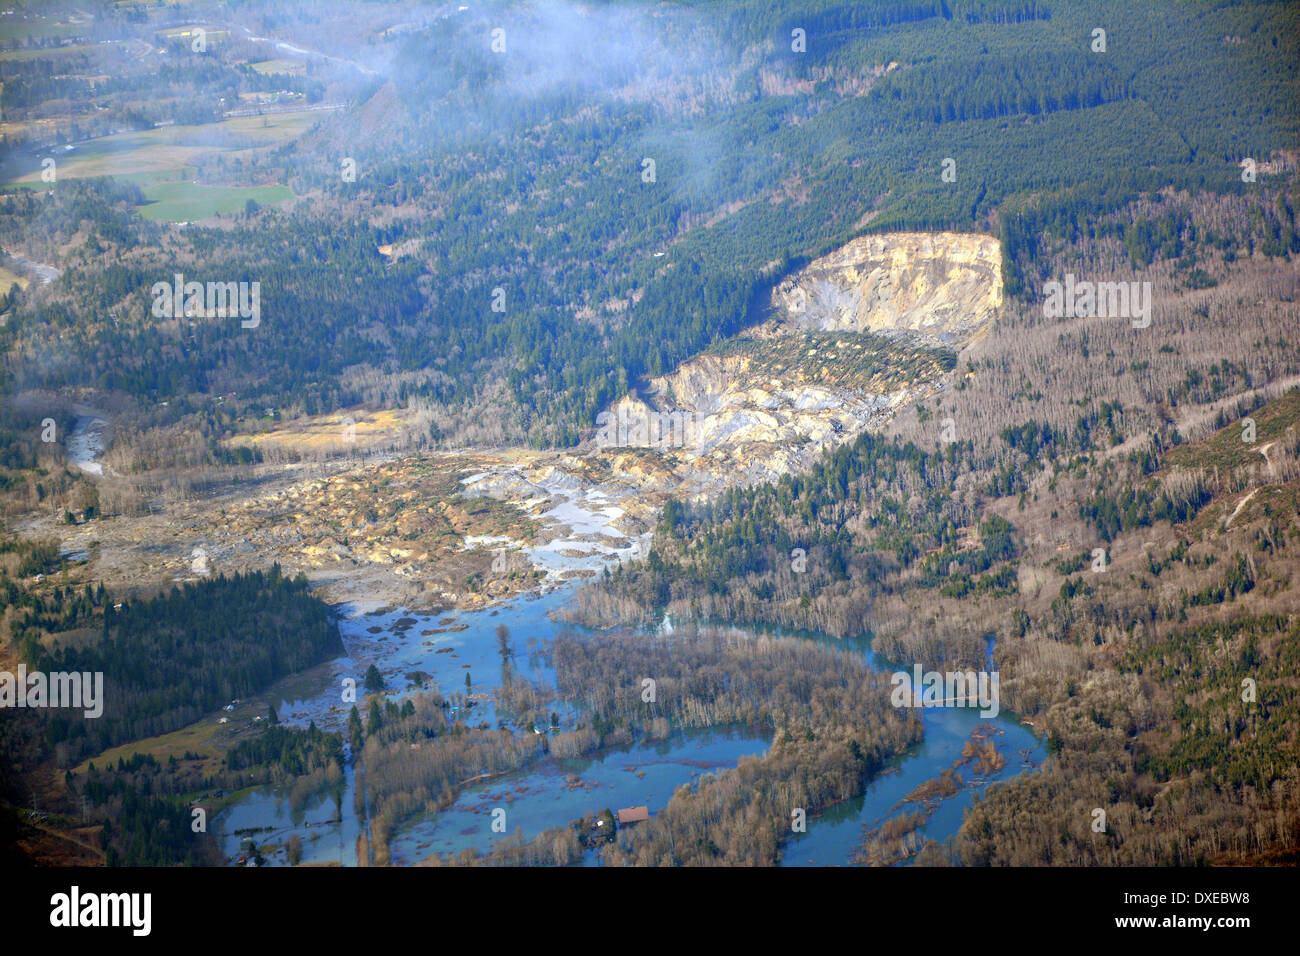 Aerial view of the landslide that blocked the Stillaguamish River burying State Route 530 and causing a massive mudslide killing at least fourteen people and destroying a small riverside village in northwestern Washington state March 23, 2014 in Oso, Washington. Officials report that 176 people are still missing and feared dead. Stock Photo